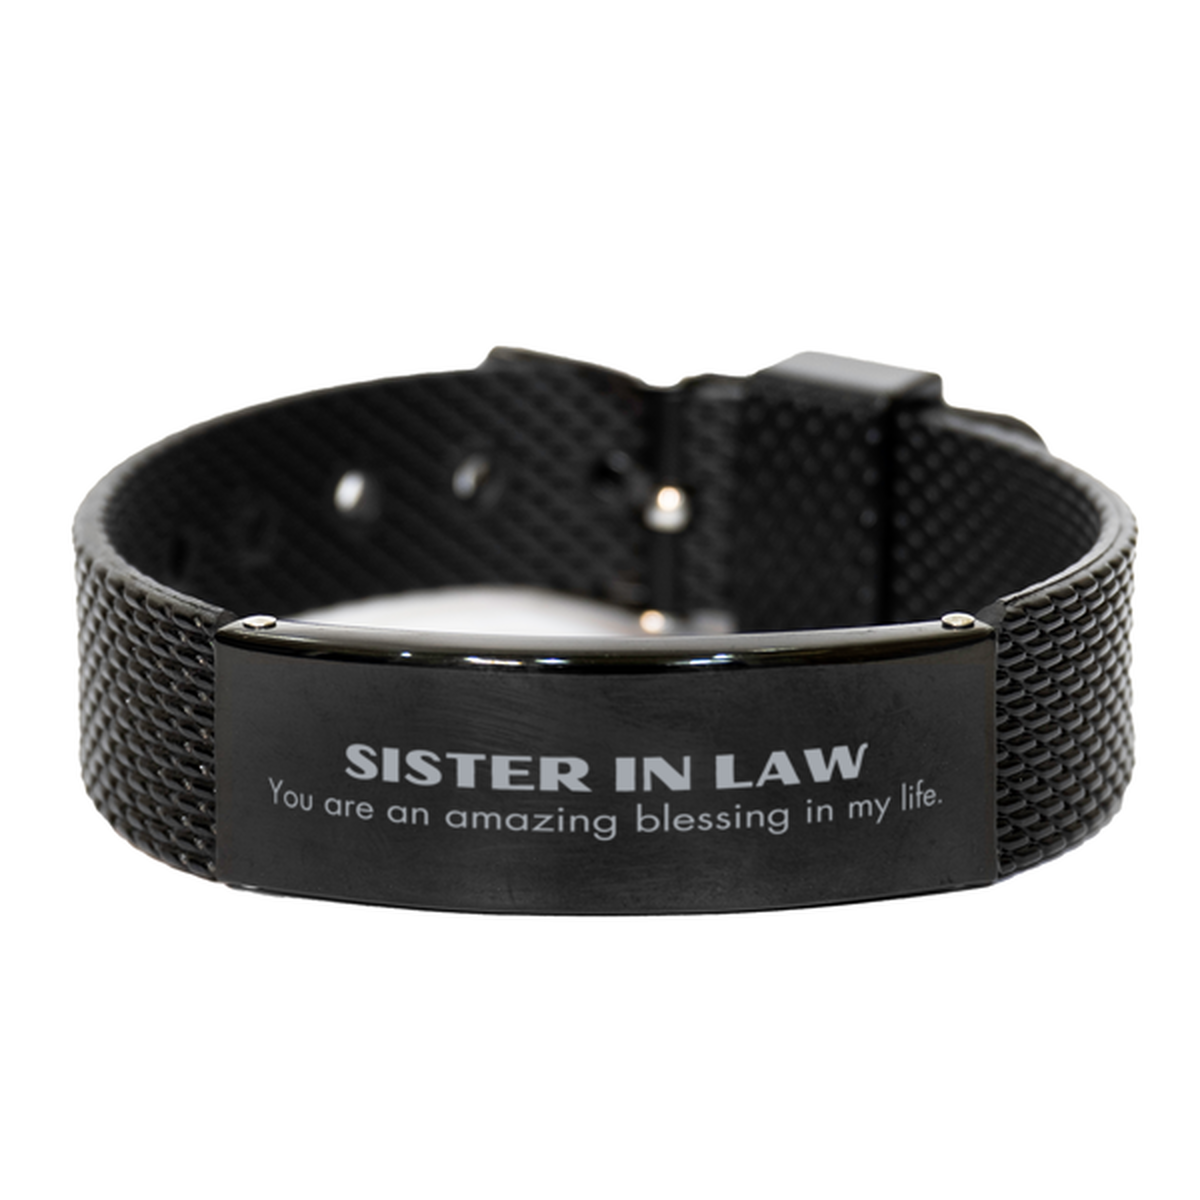 Sister In Law Black Shark Mesh Bracelet, You are an amazing blessing in my life, Thank You Gifts For Sister In Law, Inspirational Birthday Christmas Unique Gifts For Sister In Law